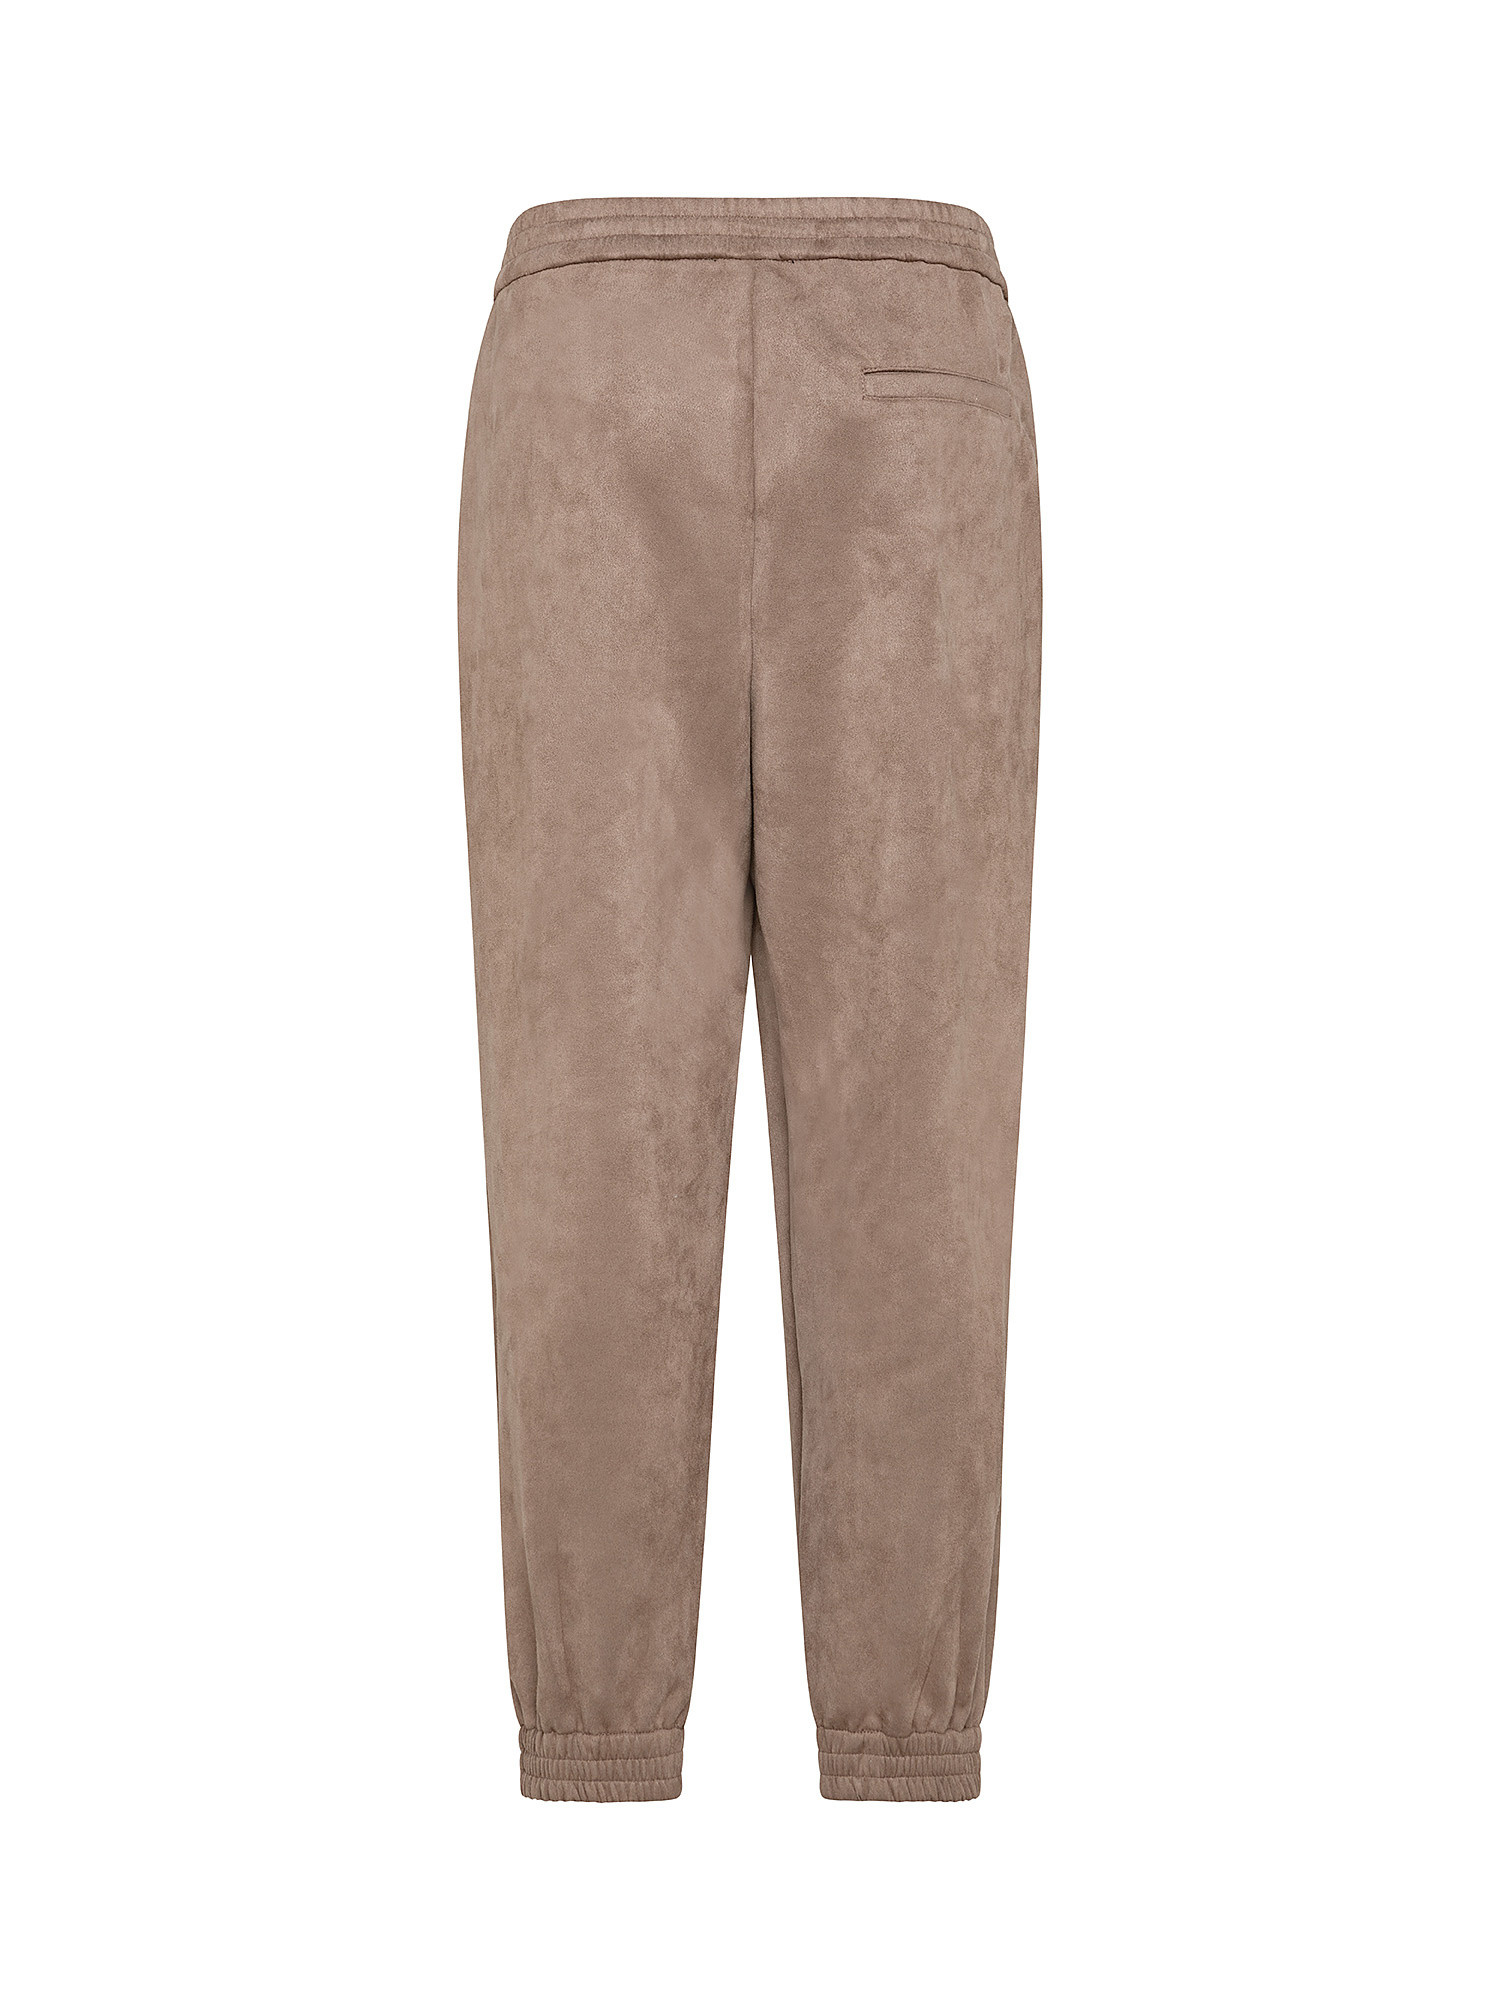 Pantalone jogger in camoscio, Marrone, large image number 1